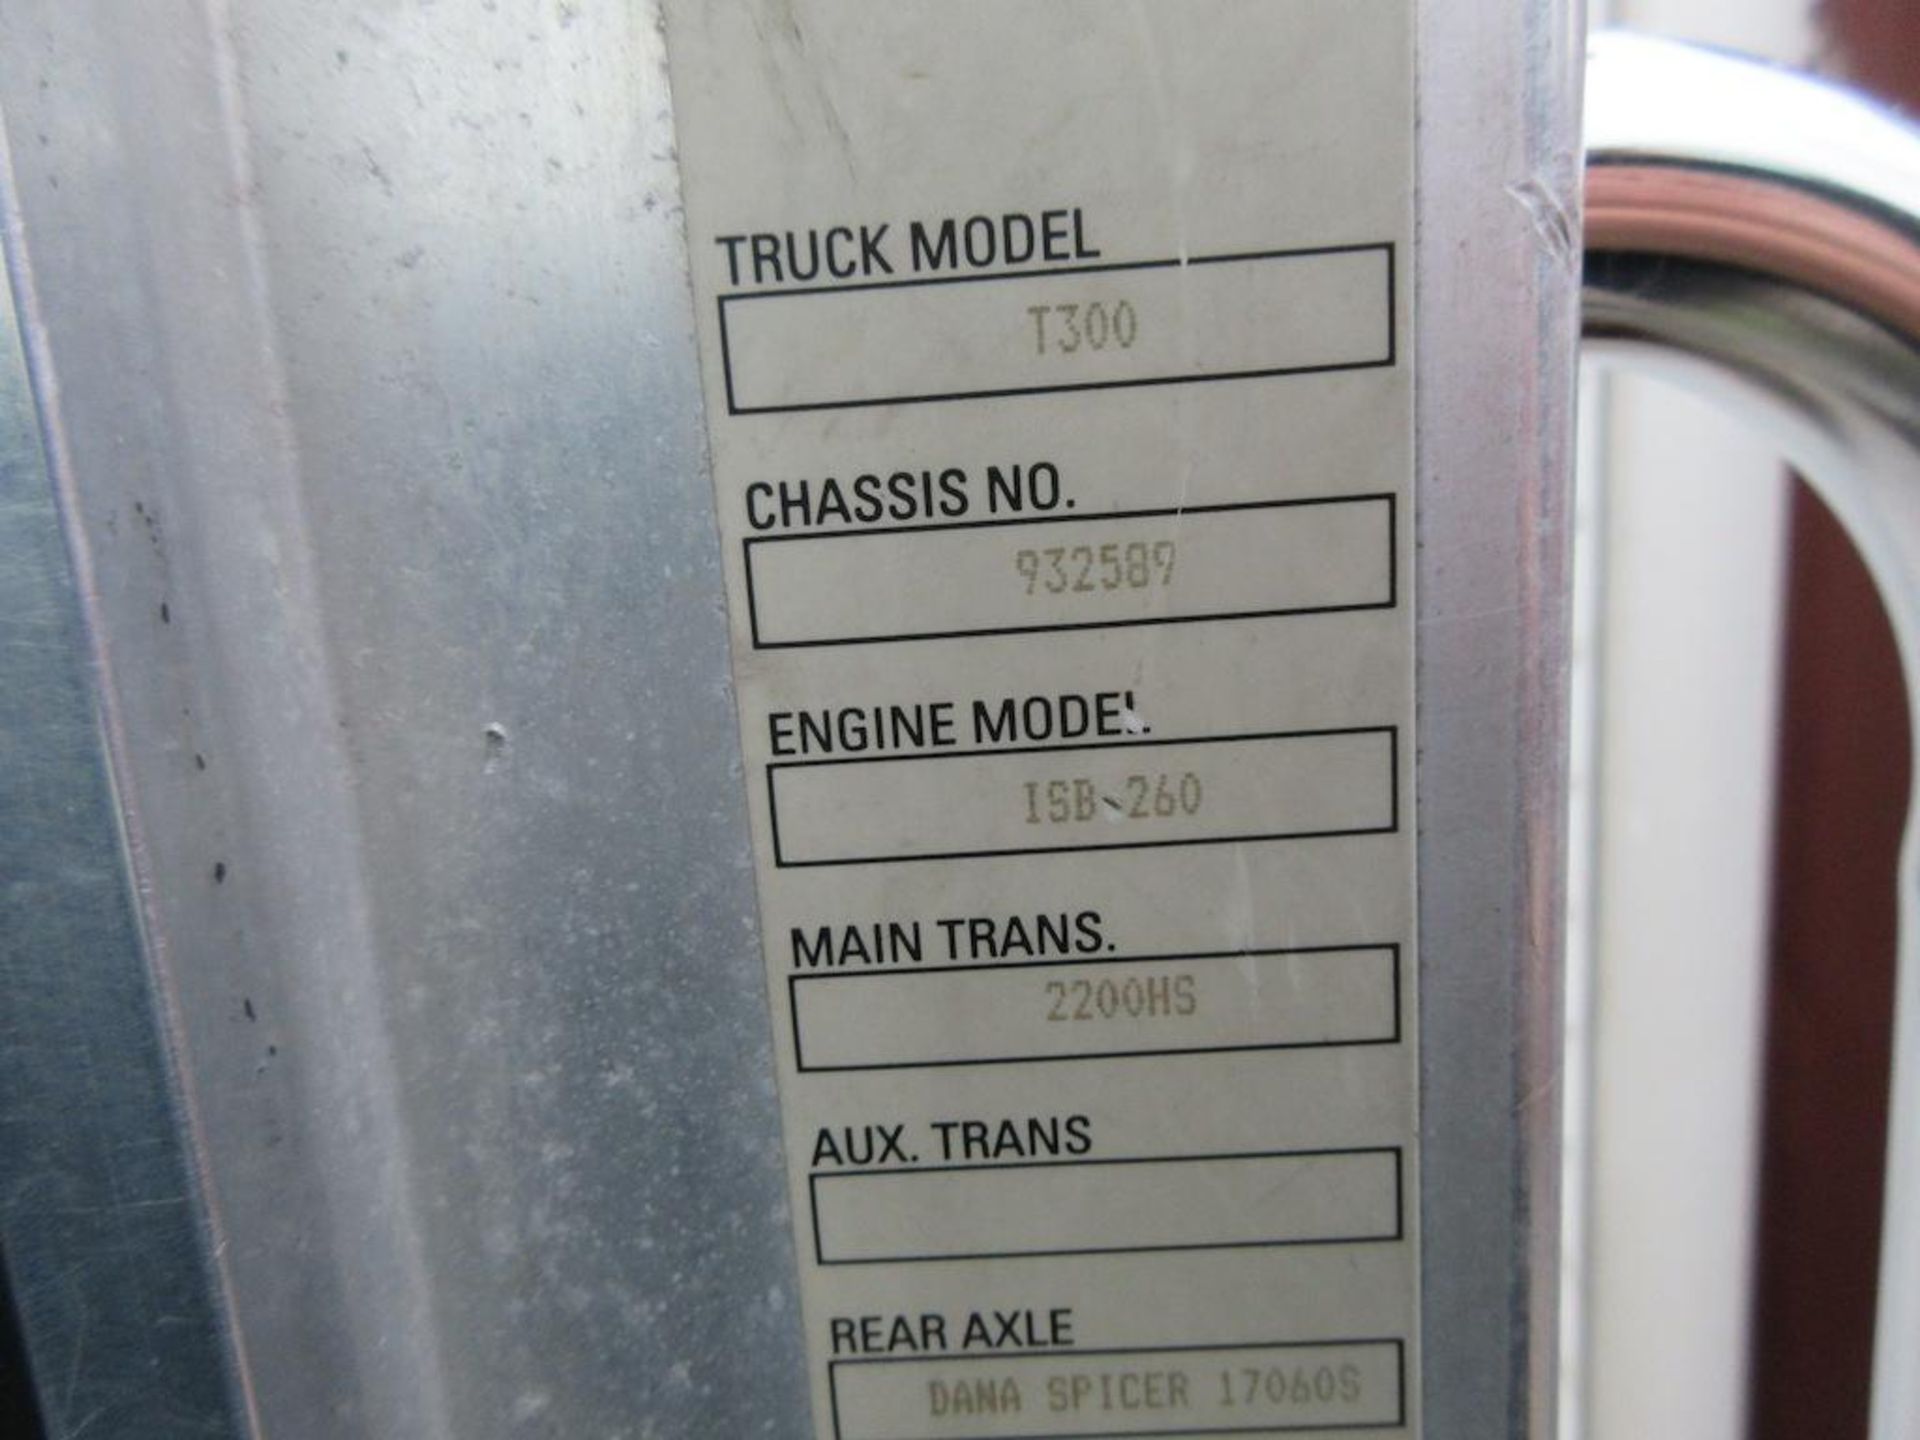 2006 Kenworth box truck model T300, 625,059 KM indicated, 10,866 hrs indicated, engine model ISB 260 - Image 10 of 15